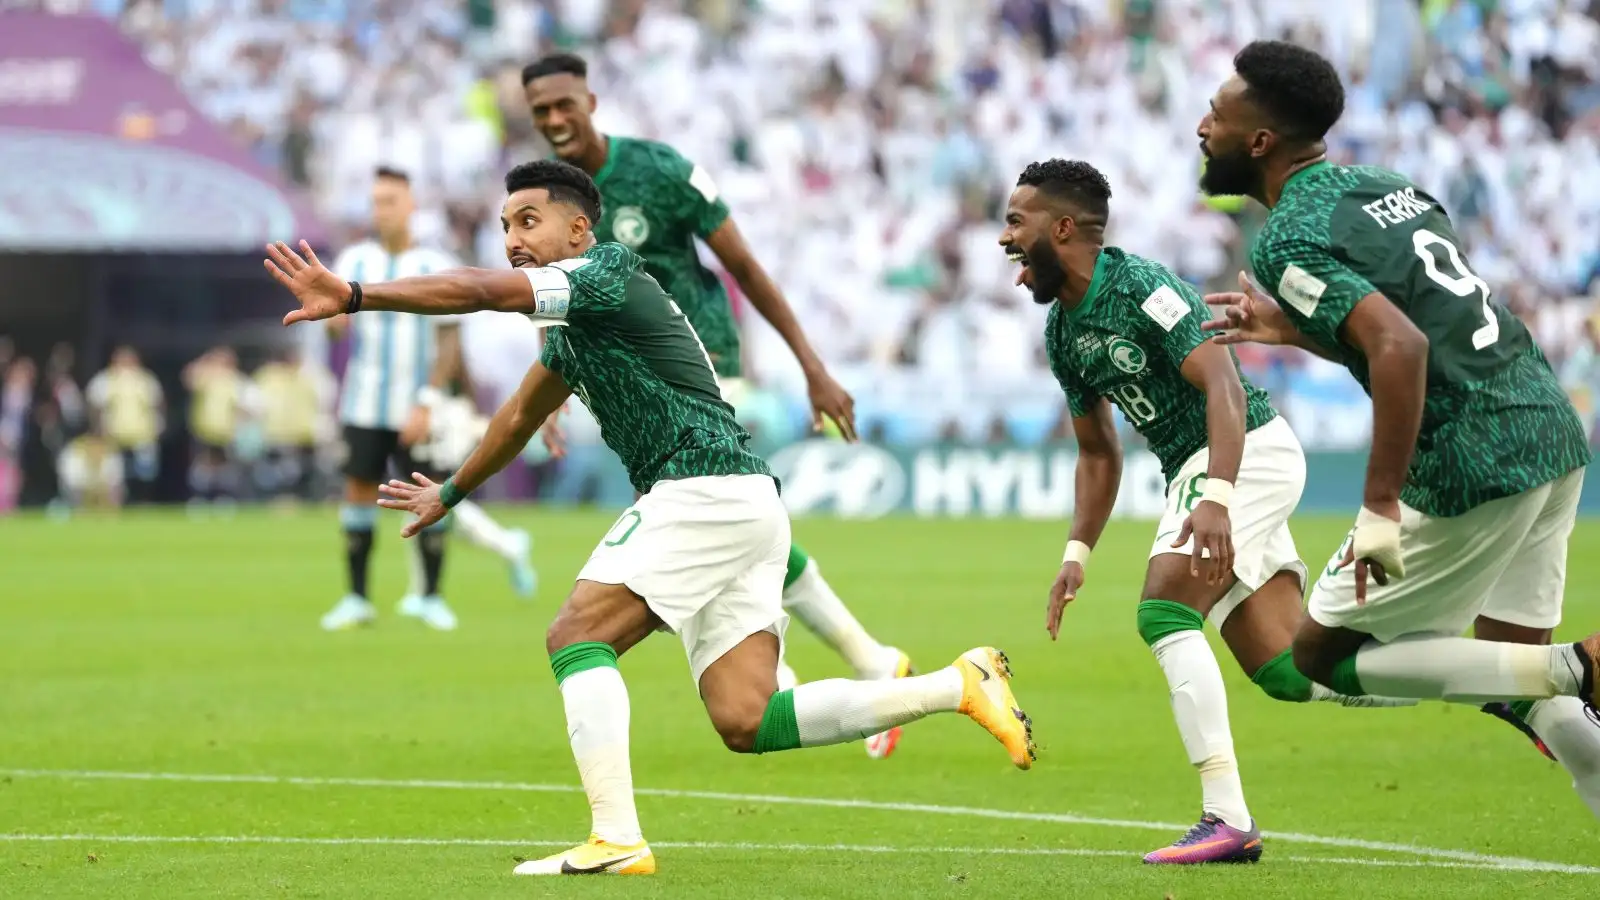 Saudi Arabia claimed a shock victory over Argentina